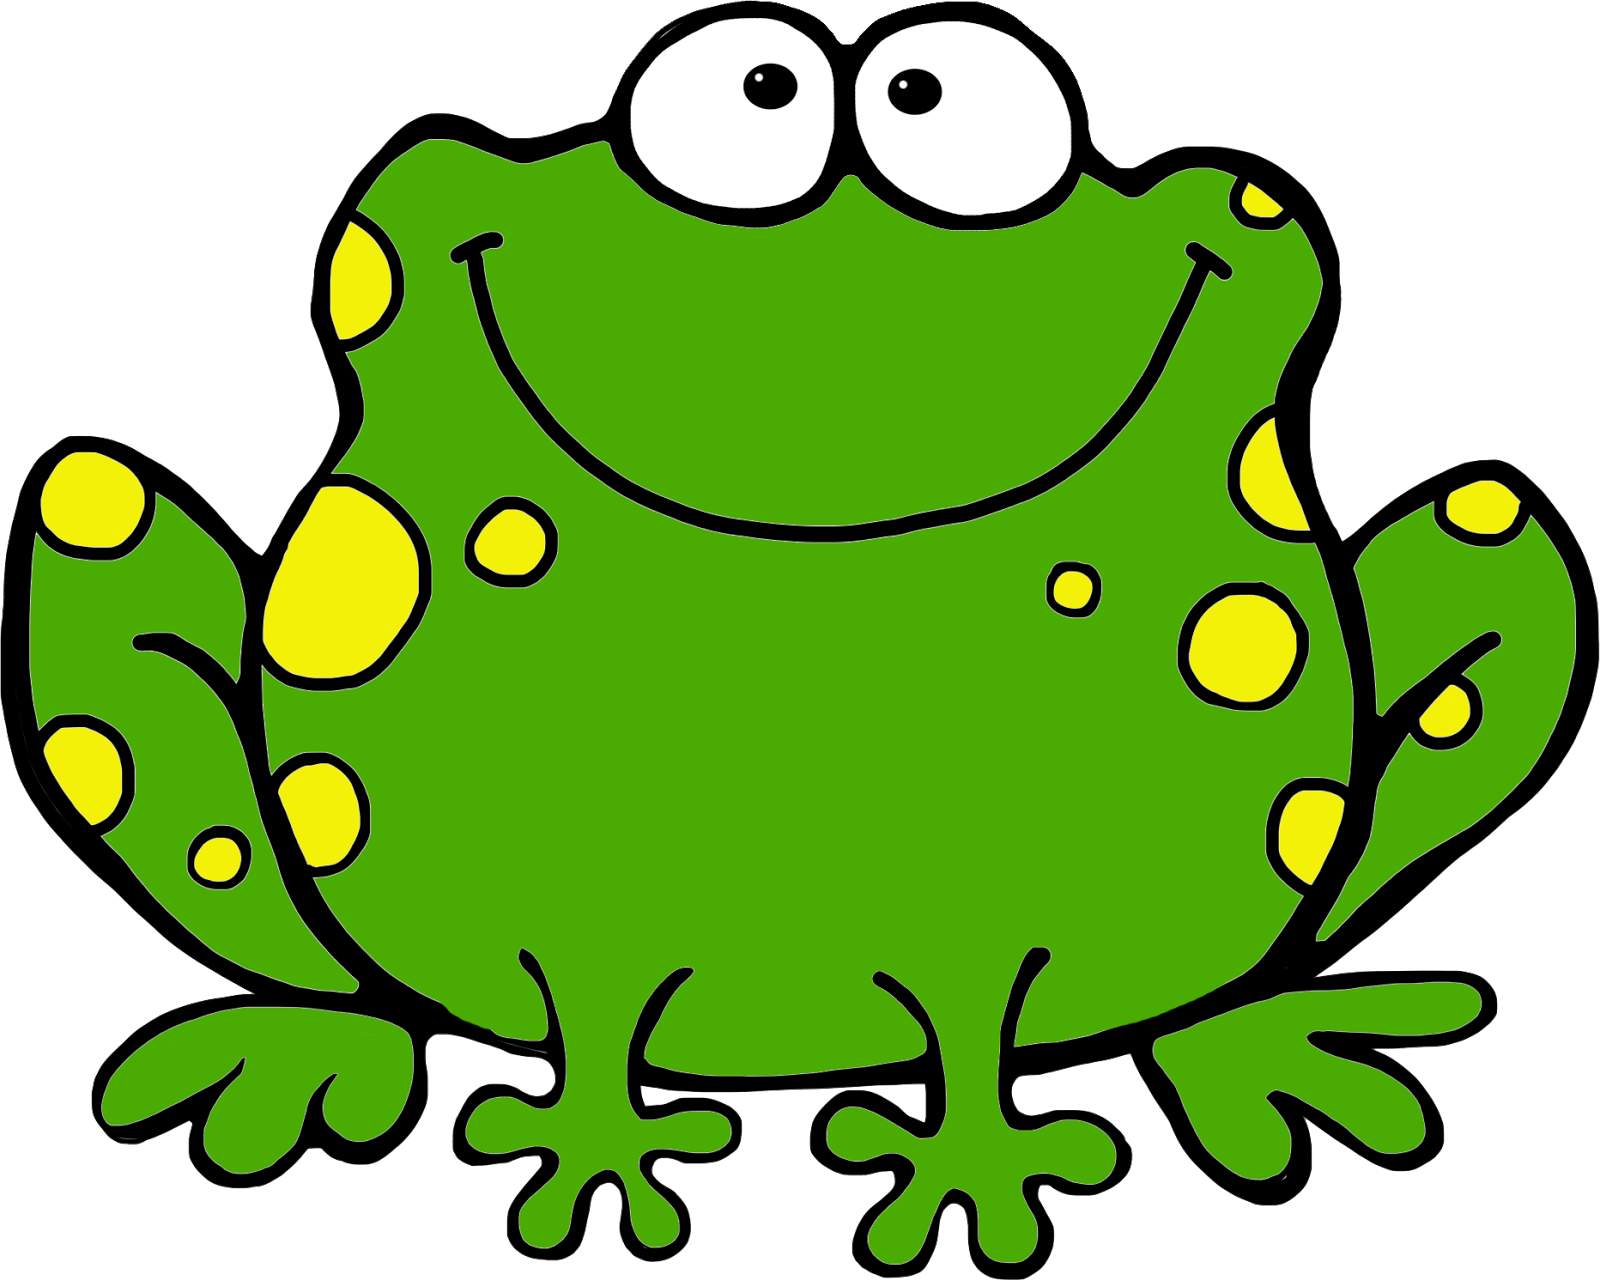 Jumping frog clip art free clipart images 2 - Cliparting.com.